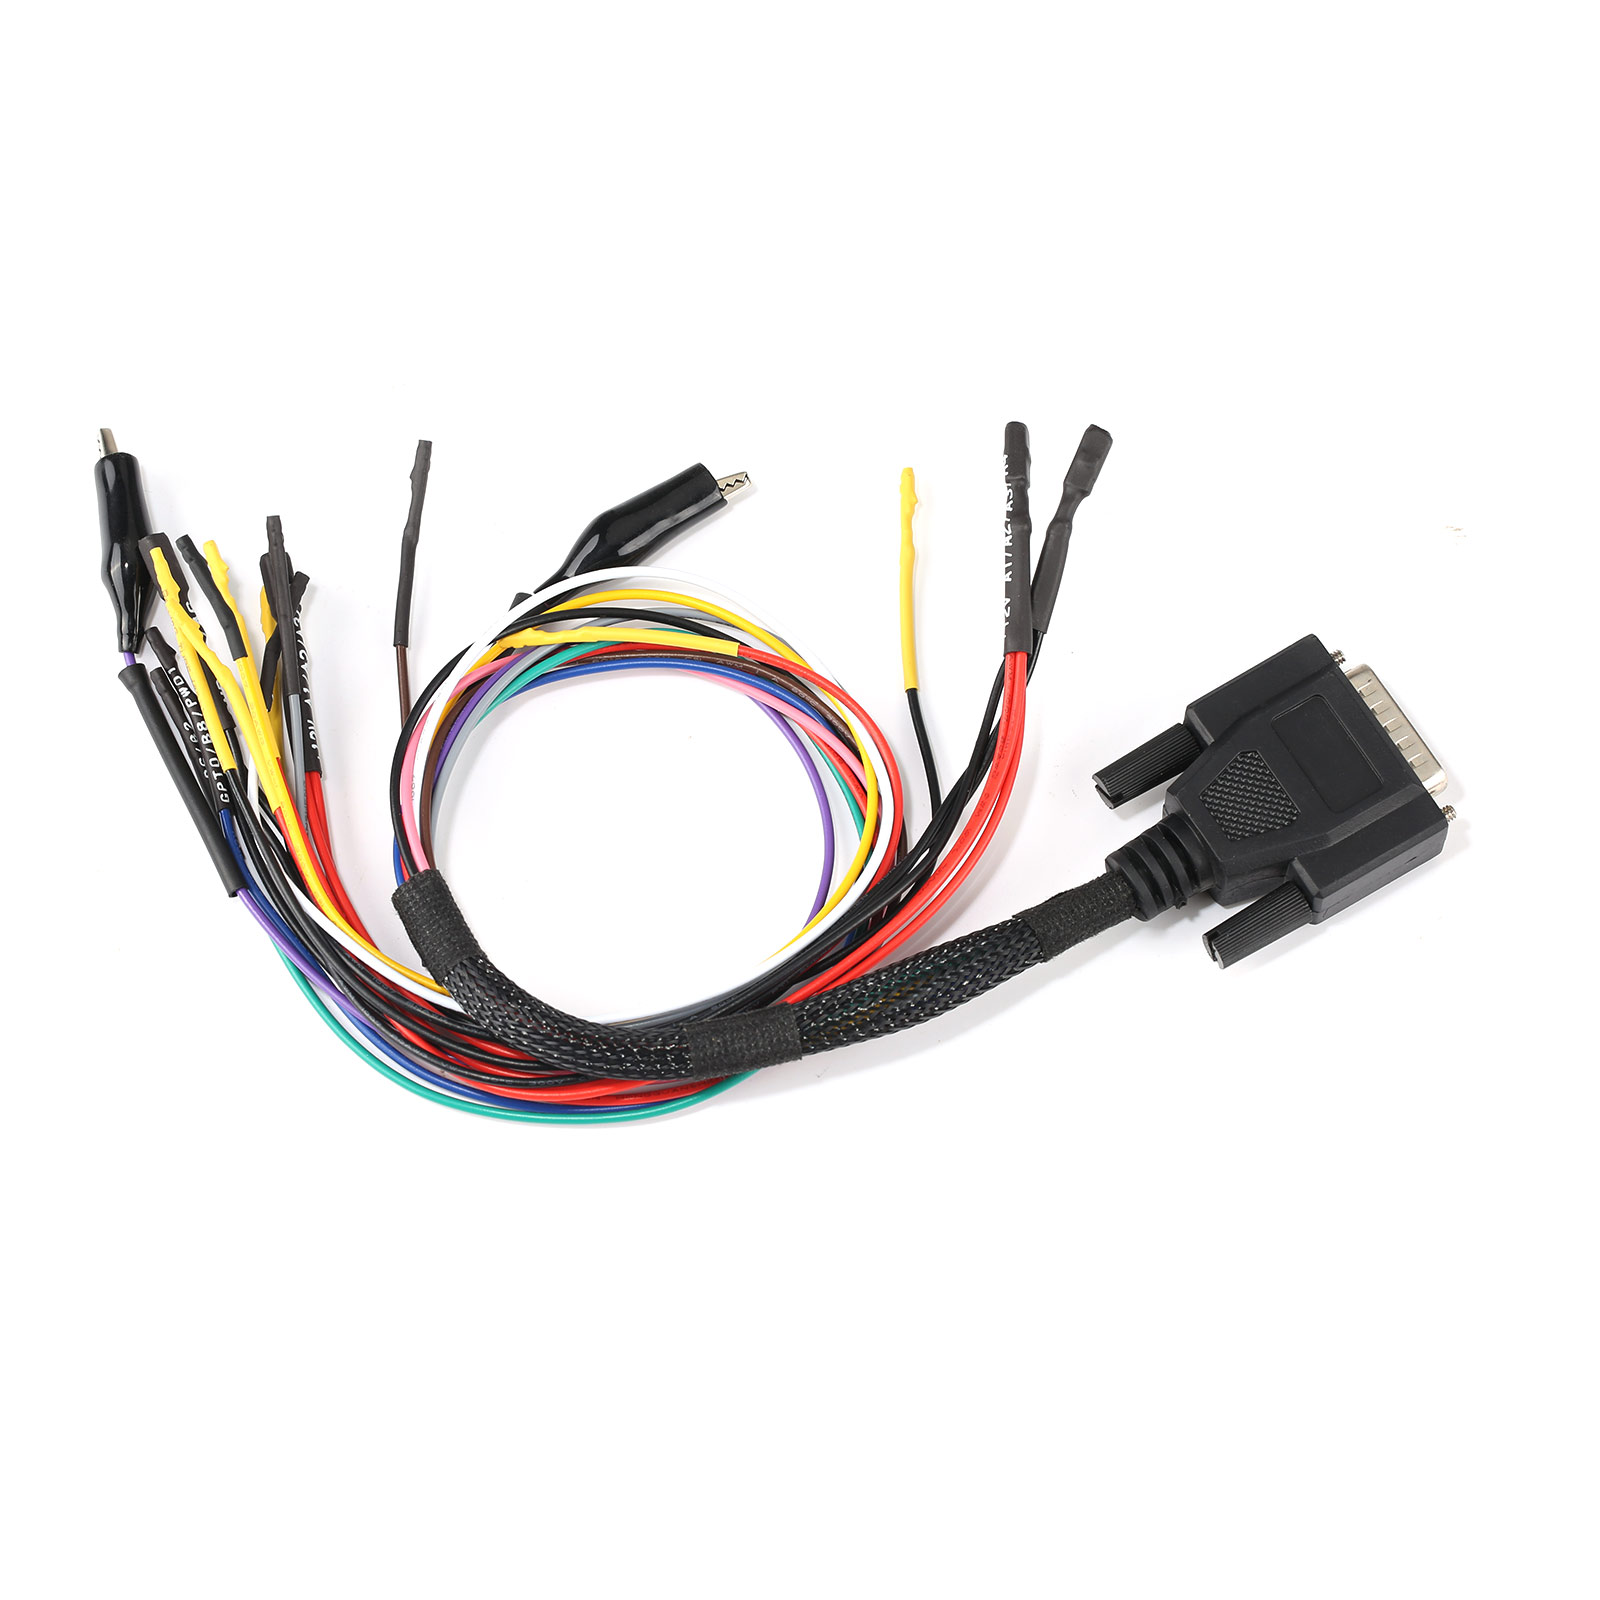 BENCH/BOOT Cable for PCMtuner ECU Chip Tuning Tool